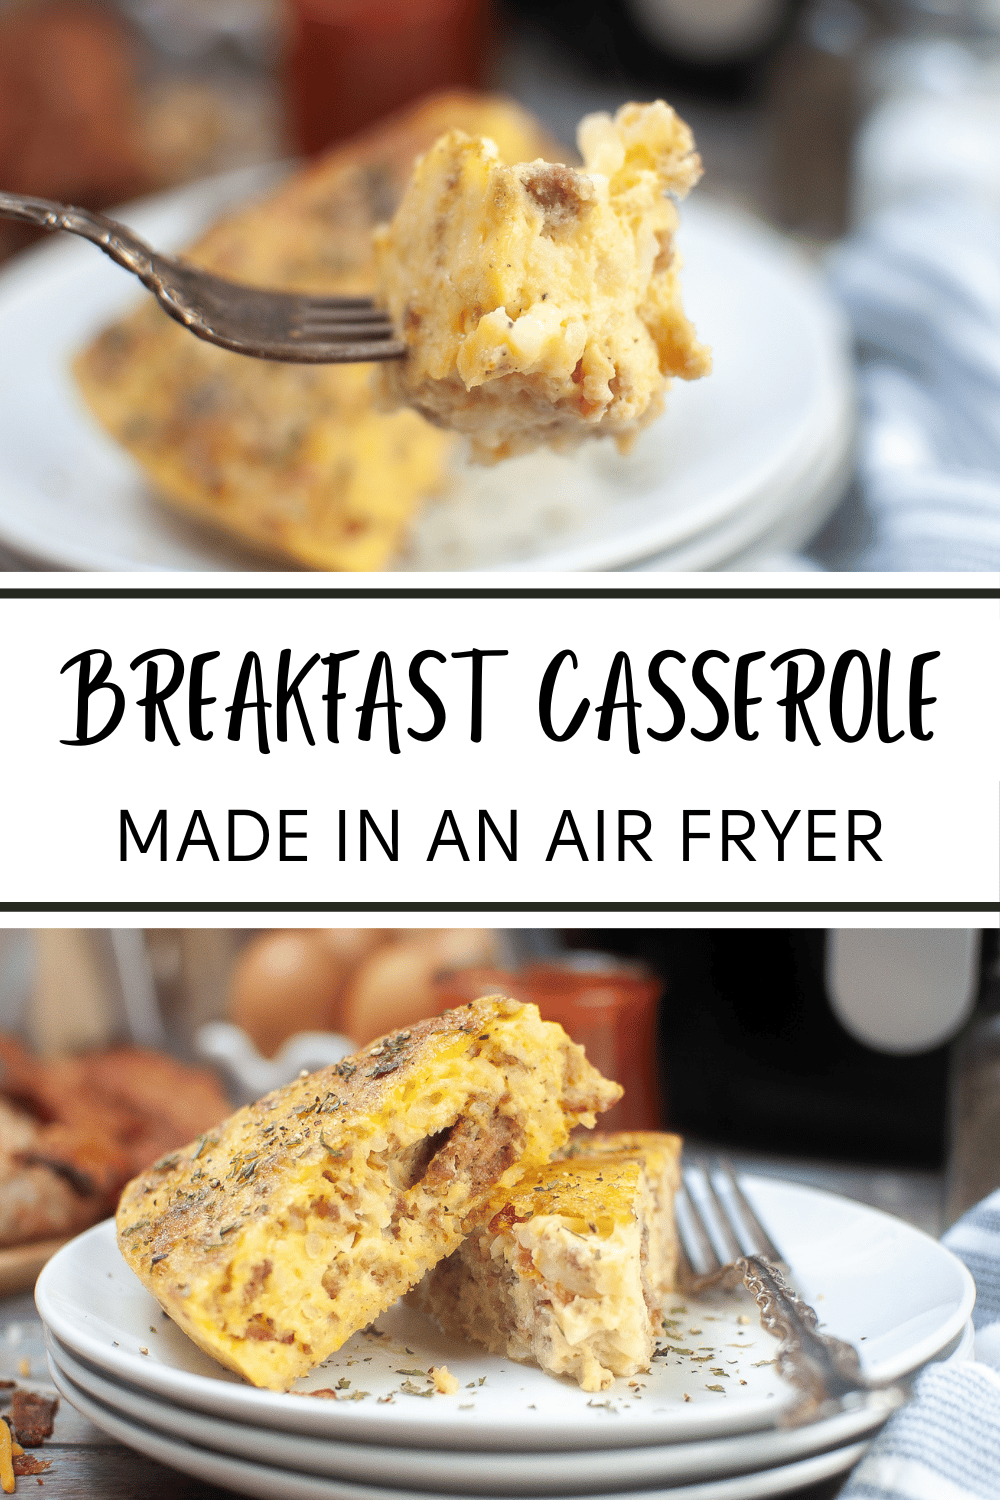 This Air Fryer Breakfast Casserole recipe is easy to make and full of flavor! It’s the perfect dish to feed a crowd for brunch or breakfast. #airfryer #breakfastcasserole #breakfastrecipe #brunch via @wondermomwannab